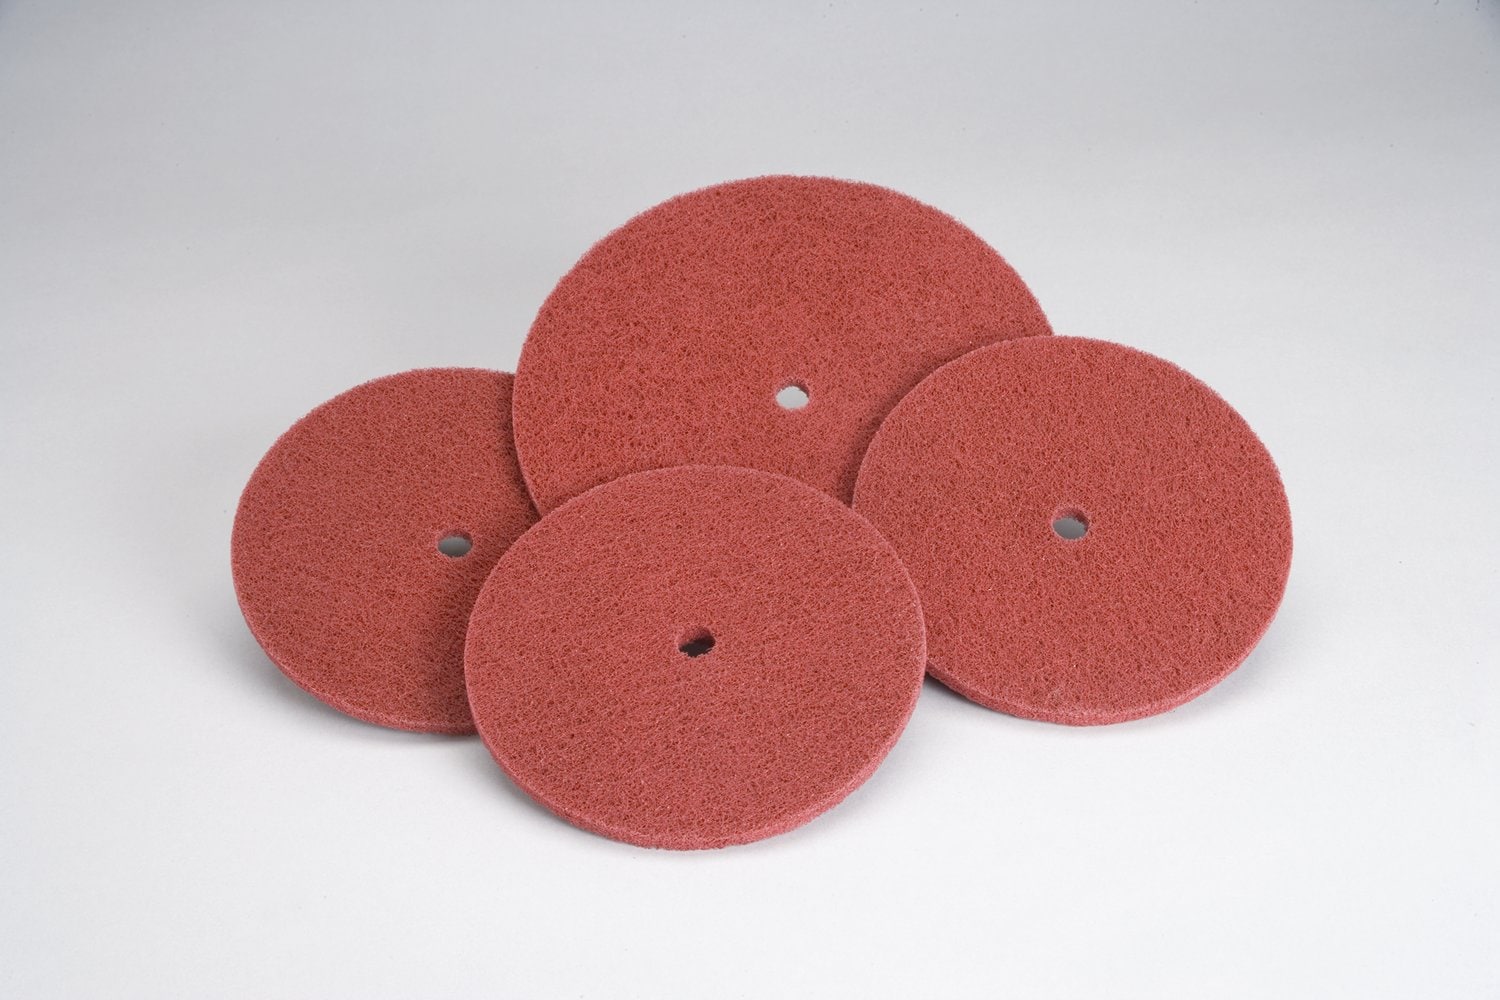 7010292739 - Standard Abrasives Quick Change Buff and Blend HP Disc, 850425, A/O
Very Fine, TR, Red, 3 in, Die Q300V, 25/Carton, 250 ea/Case